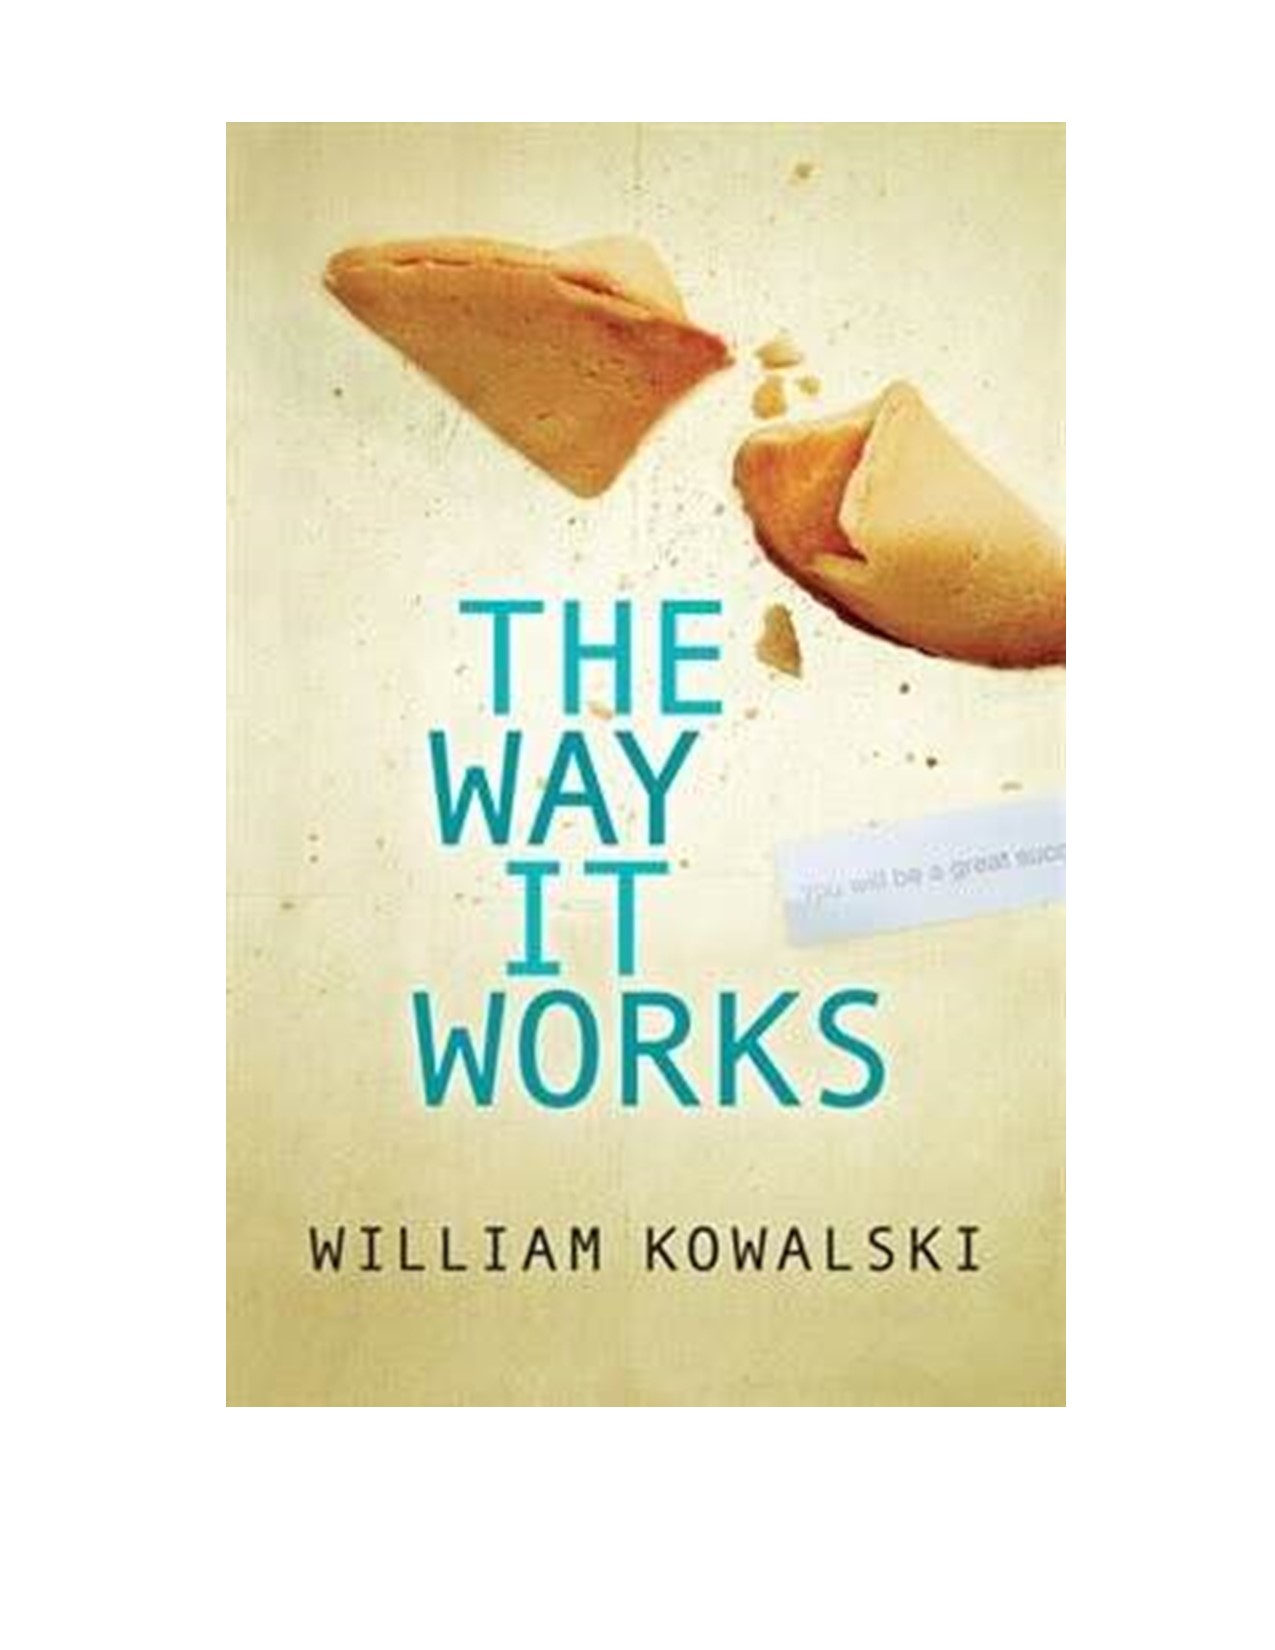 Book cover for The Way Works by William Kowalski